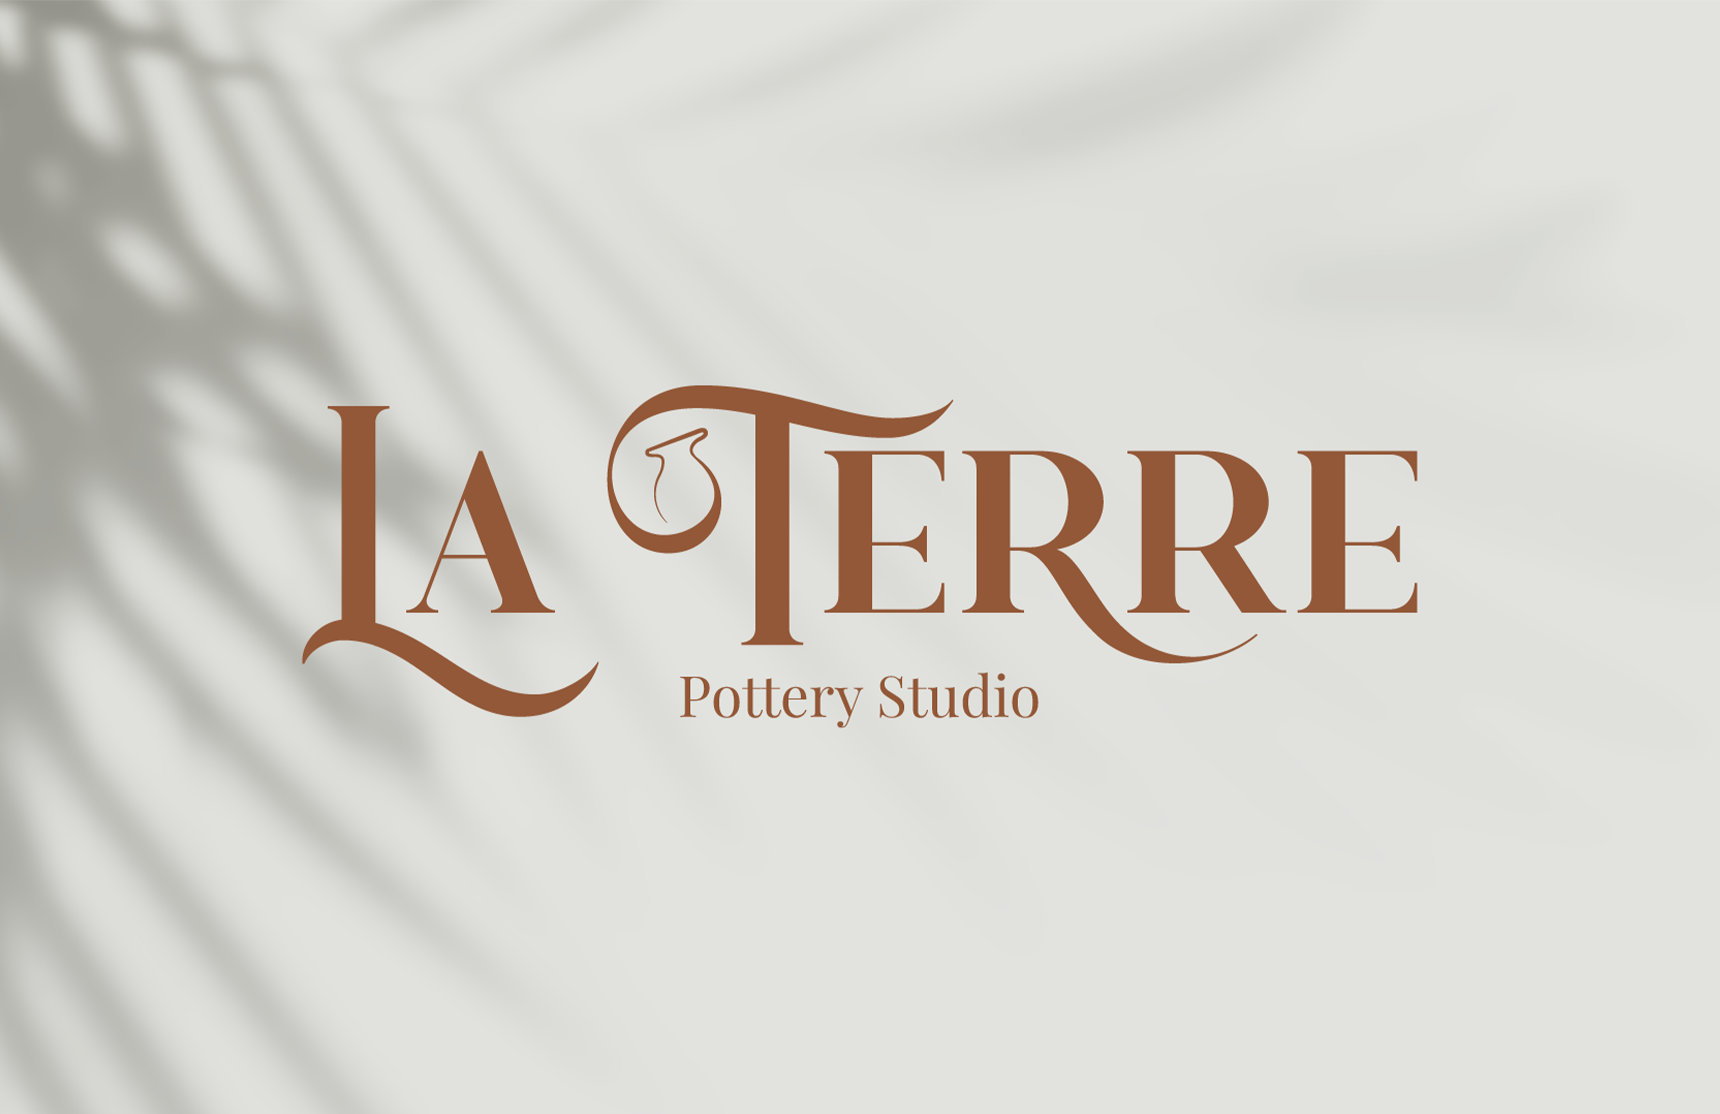 You are currently viewing La Terre